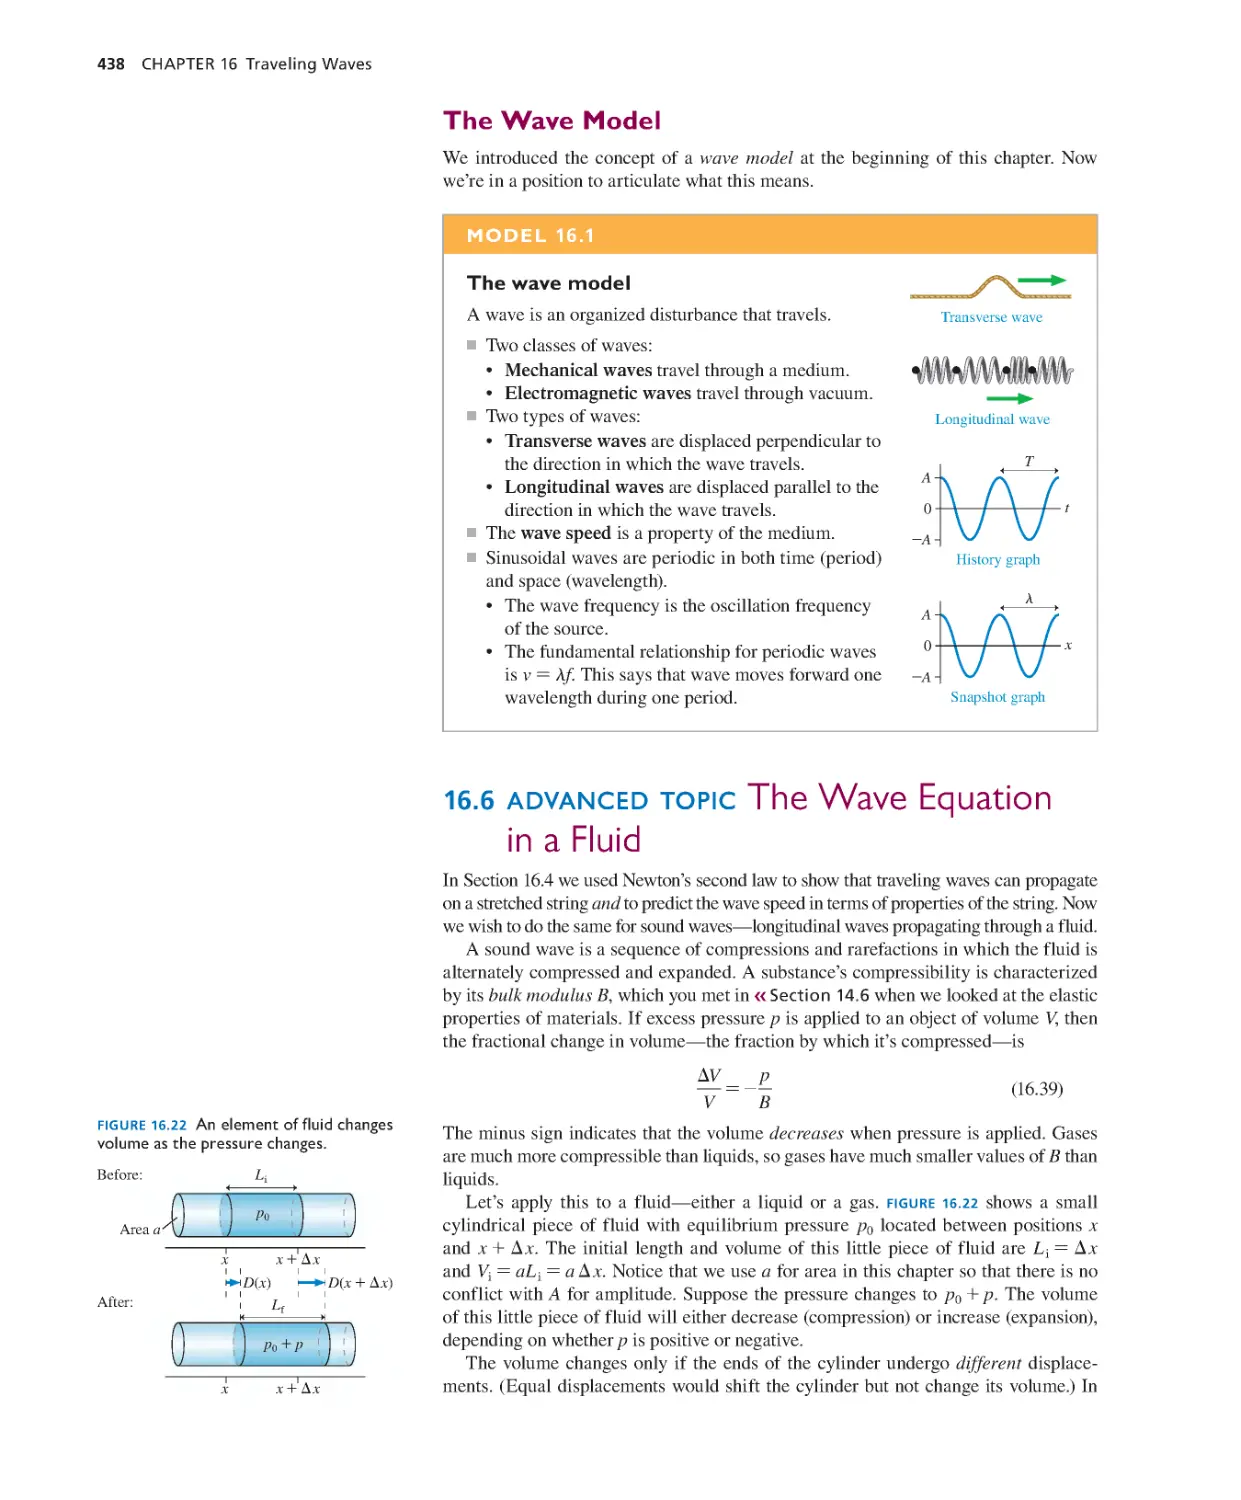 16.6. Advanced Topic: The Wave Equation in a Fluid